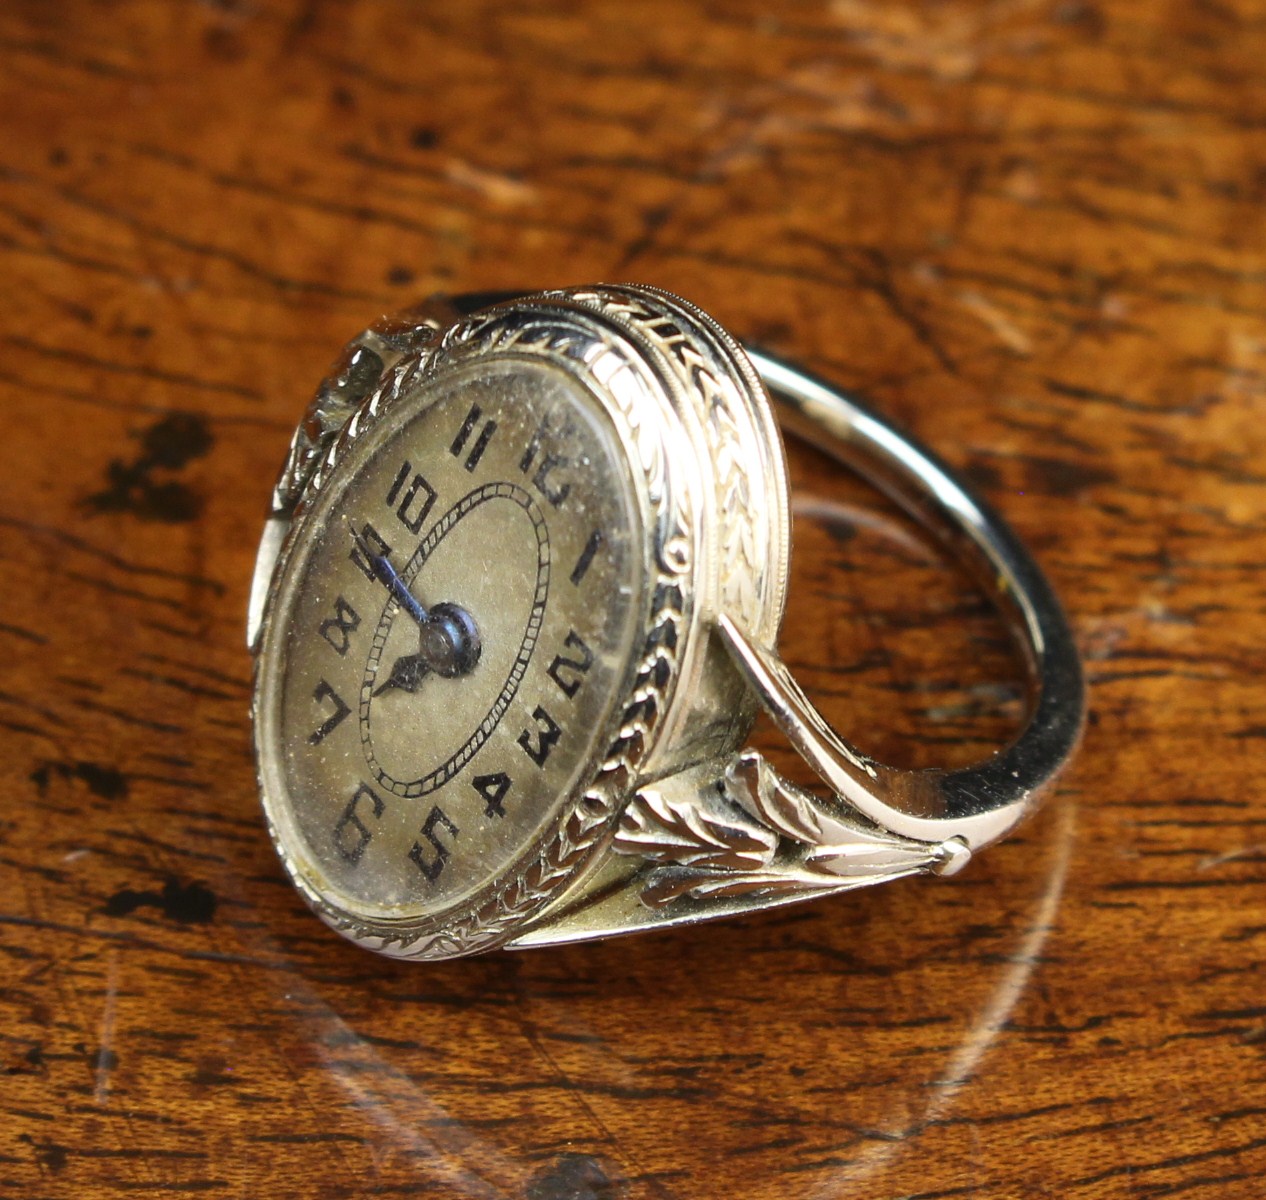 A Platinum Swiss Made Lady's Watch Ring by Gübelin, Circa 1930 with an oval dial, - Image 5 of 6